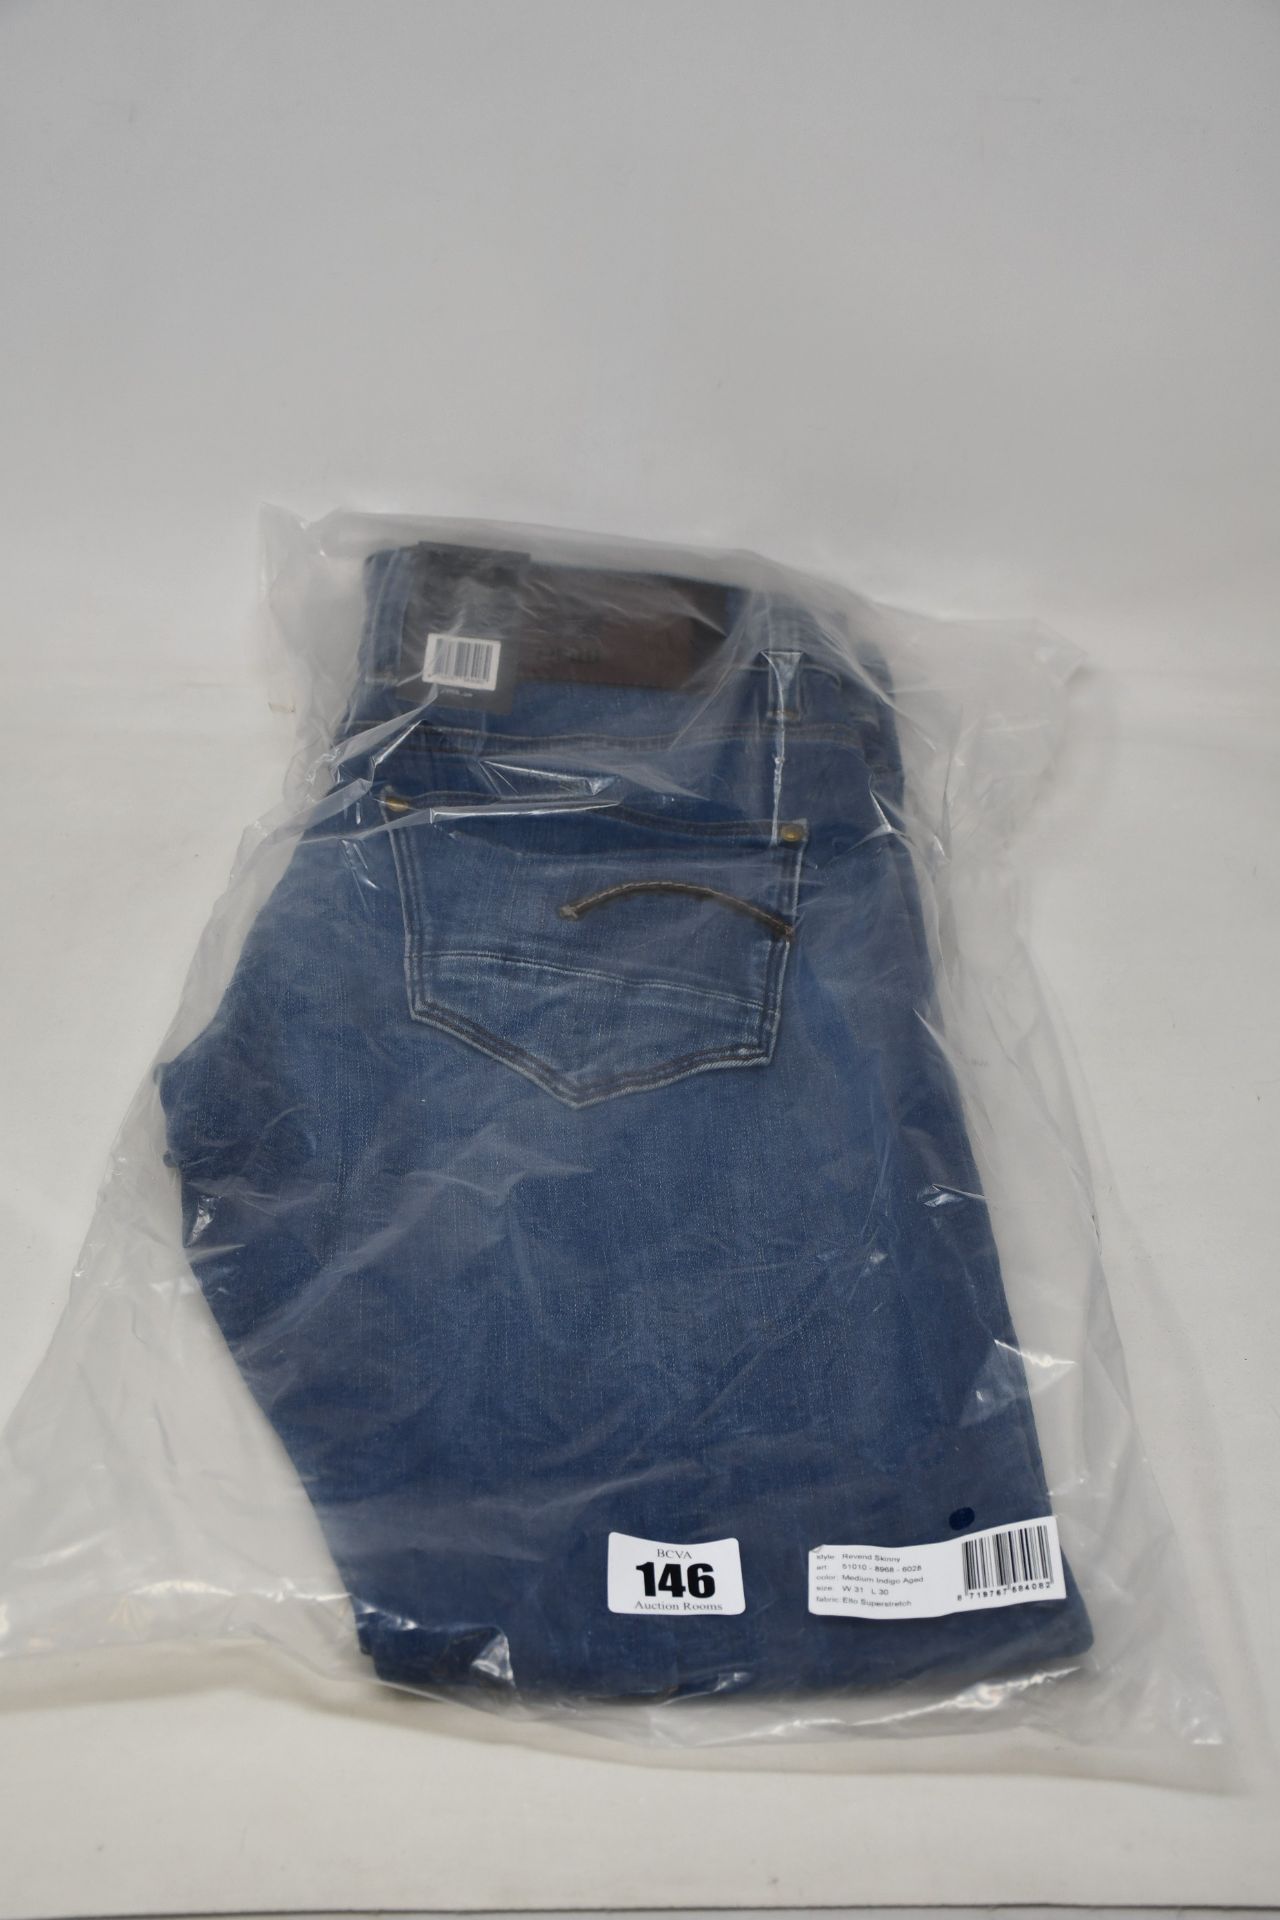 Four pairs of as new G-Star Raw jeans (All W31/L30).